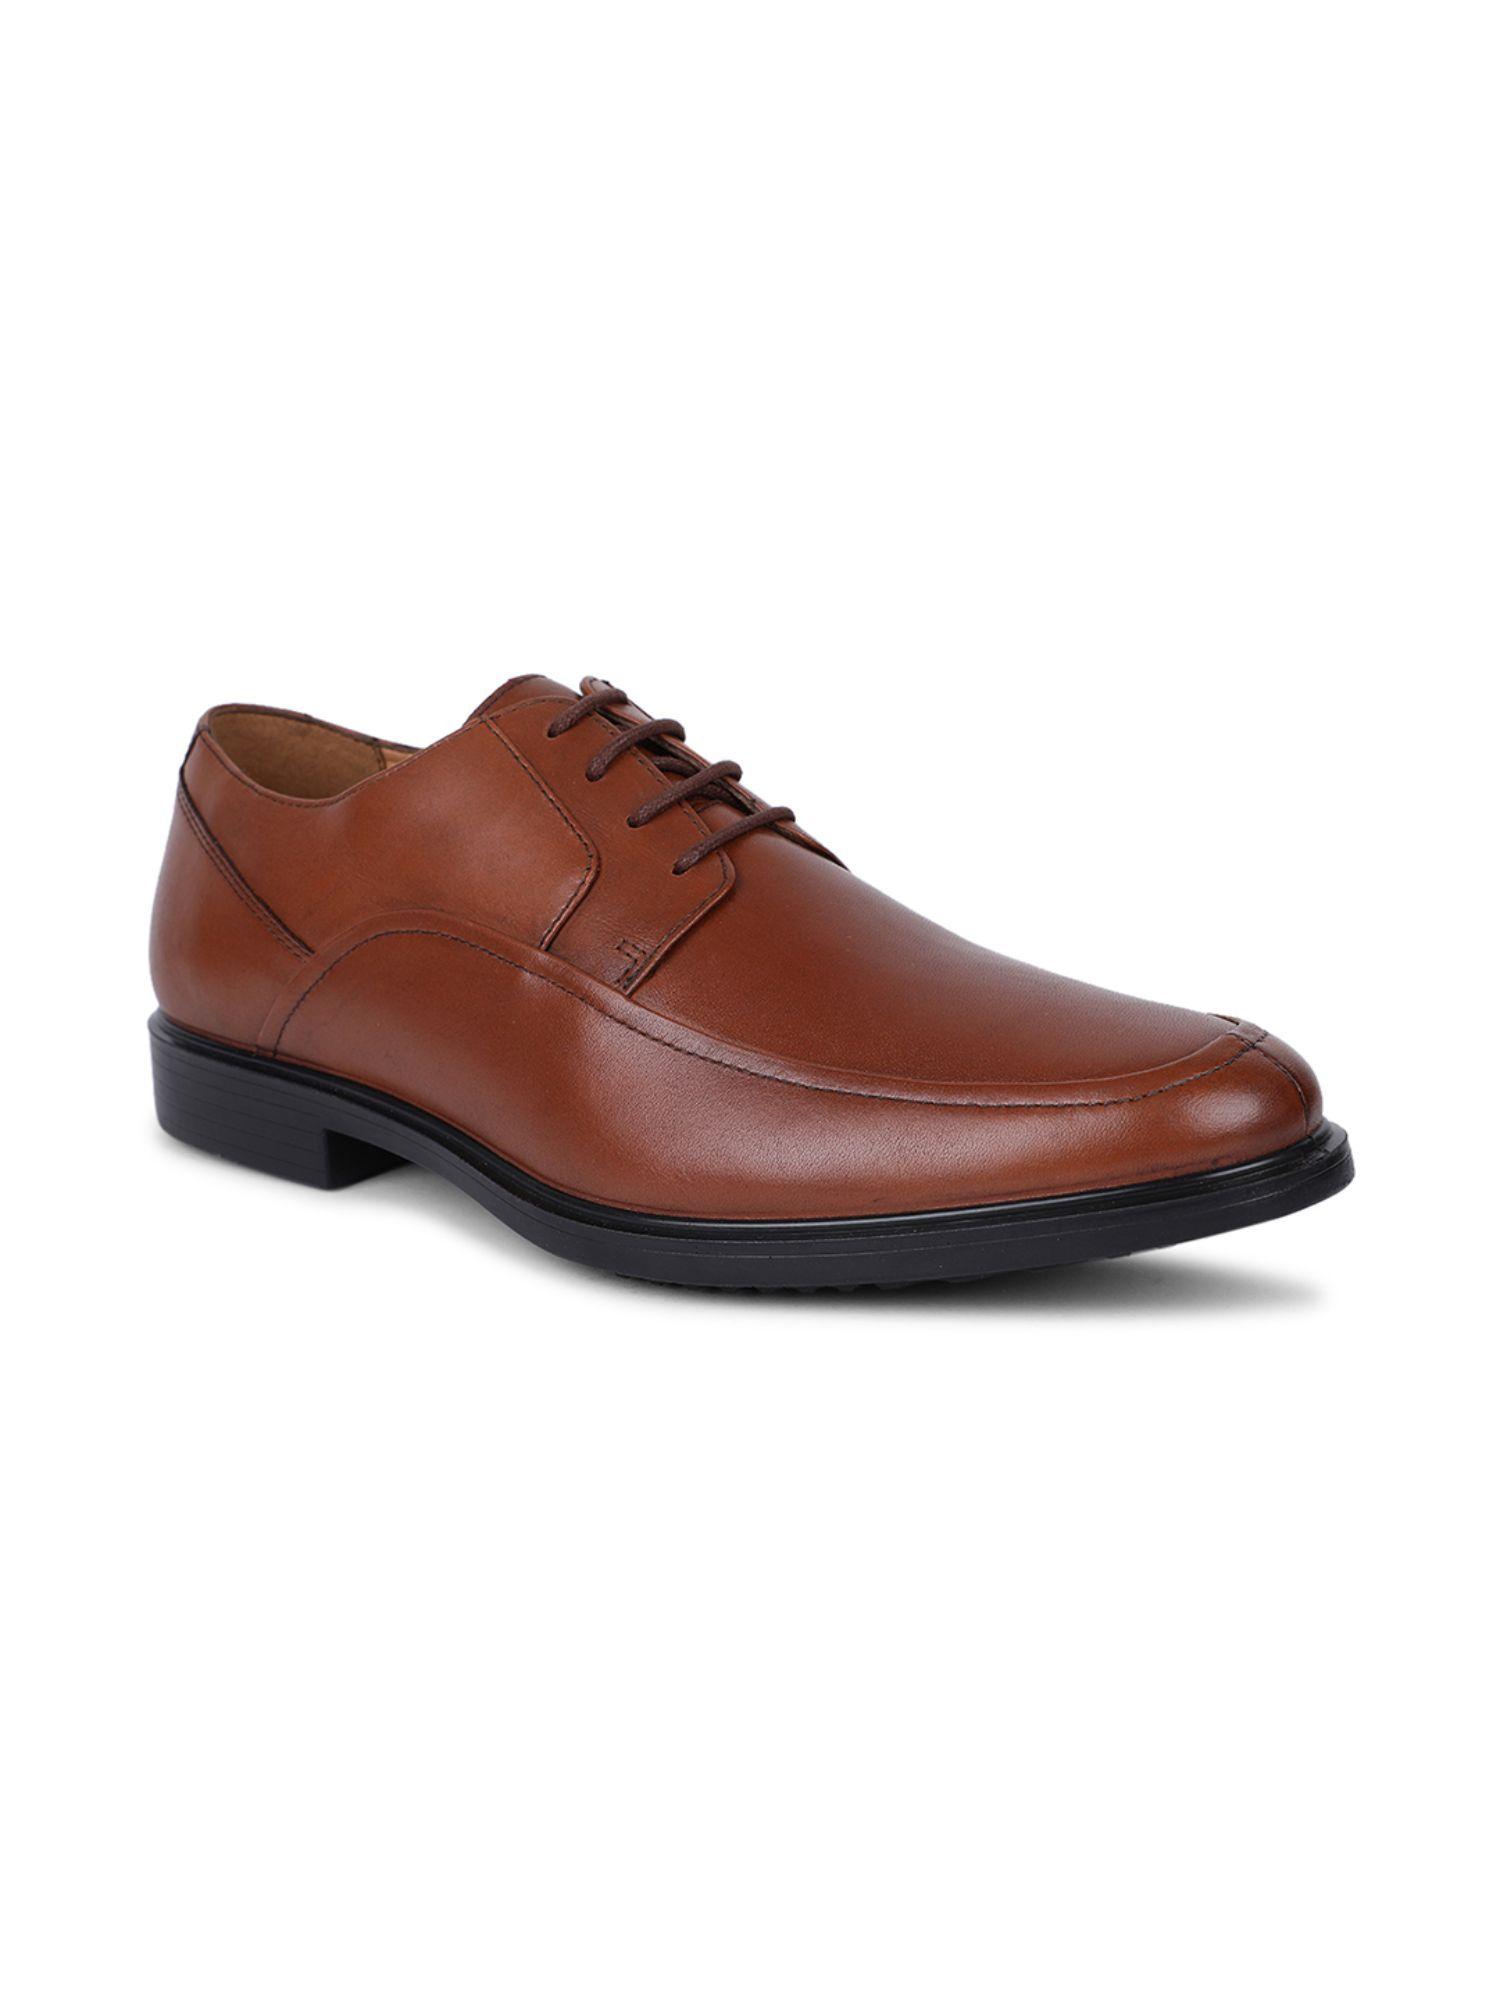 solid-brown-formal-shoes